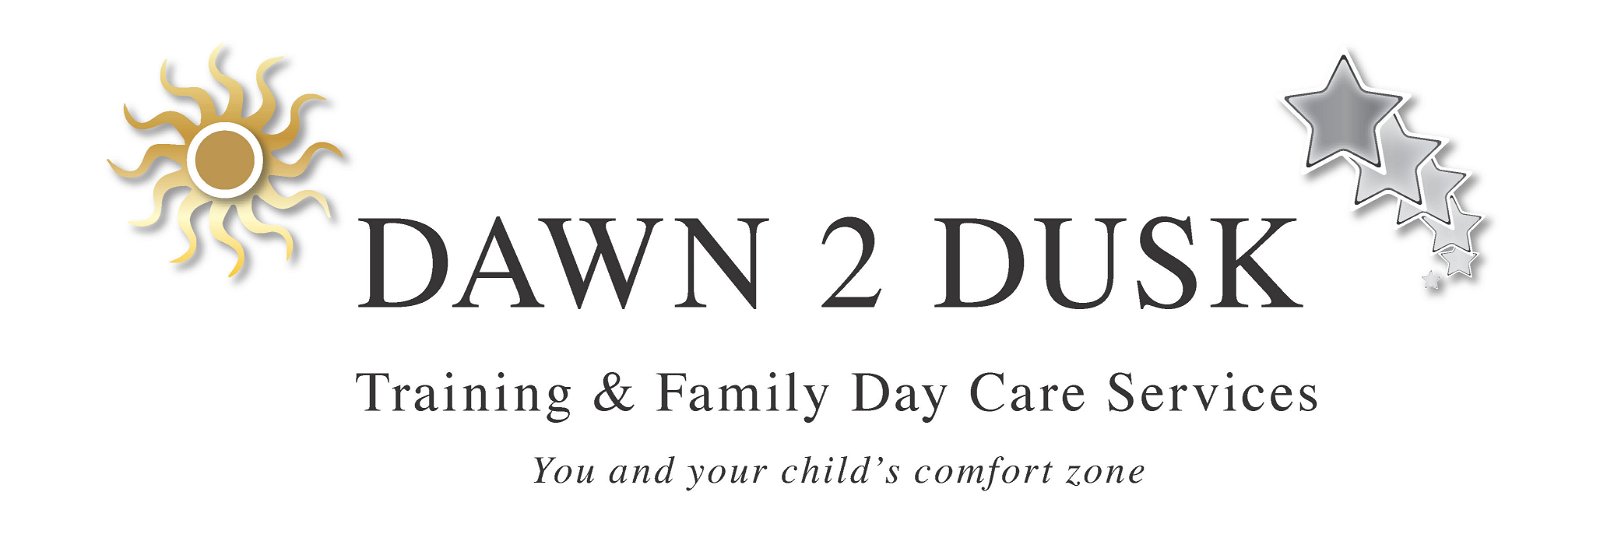 Dawn 2 Dusk Family Day Care Services Pty Ltd - thumb 1